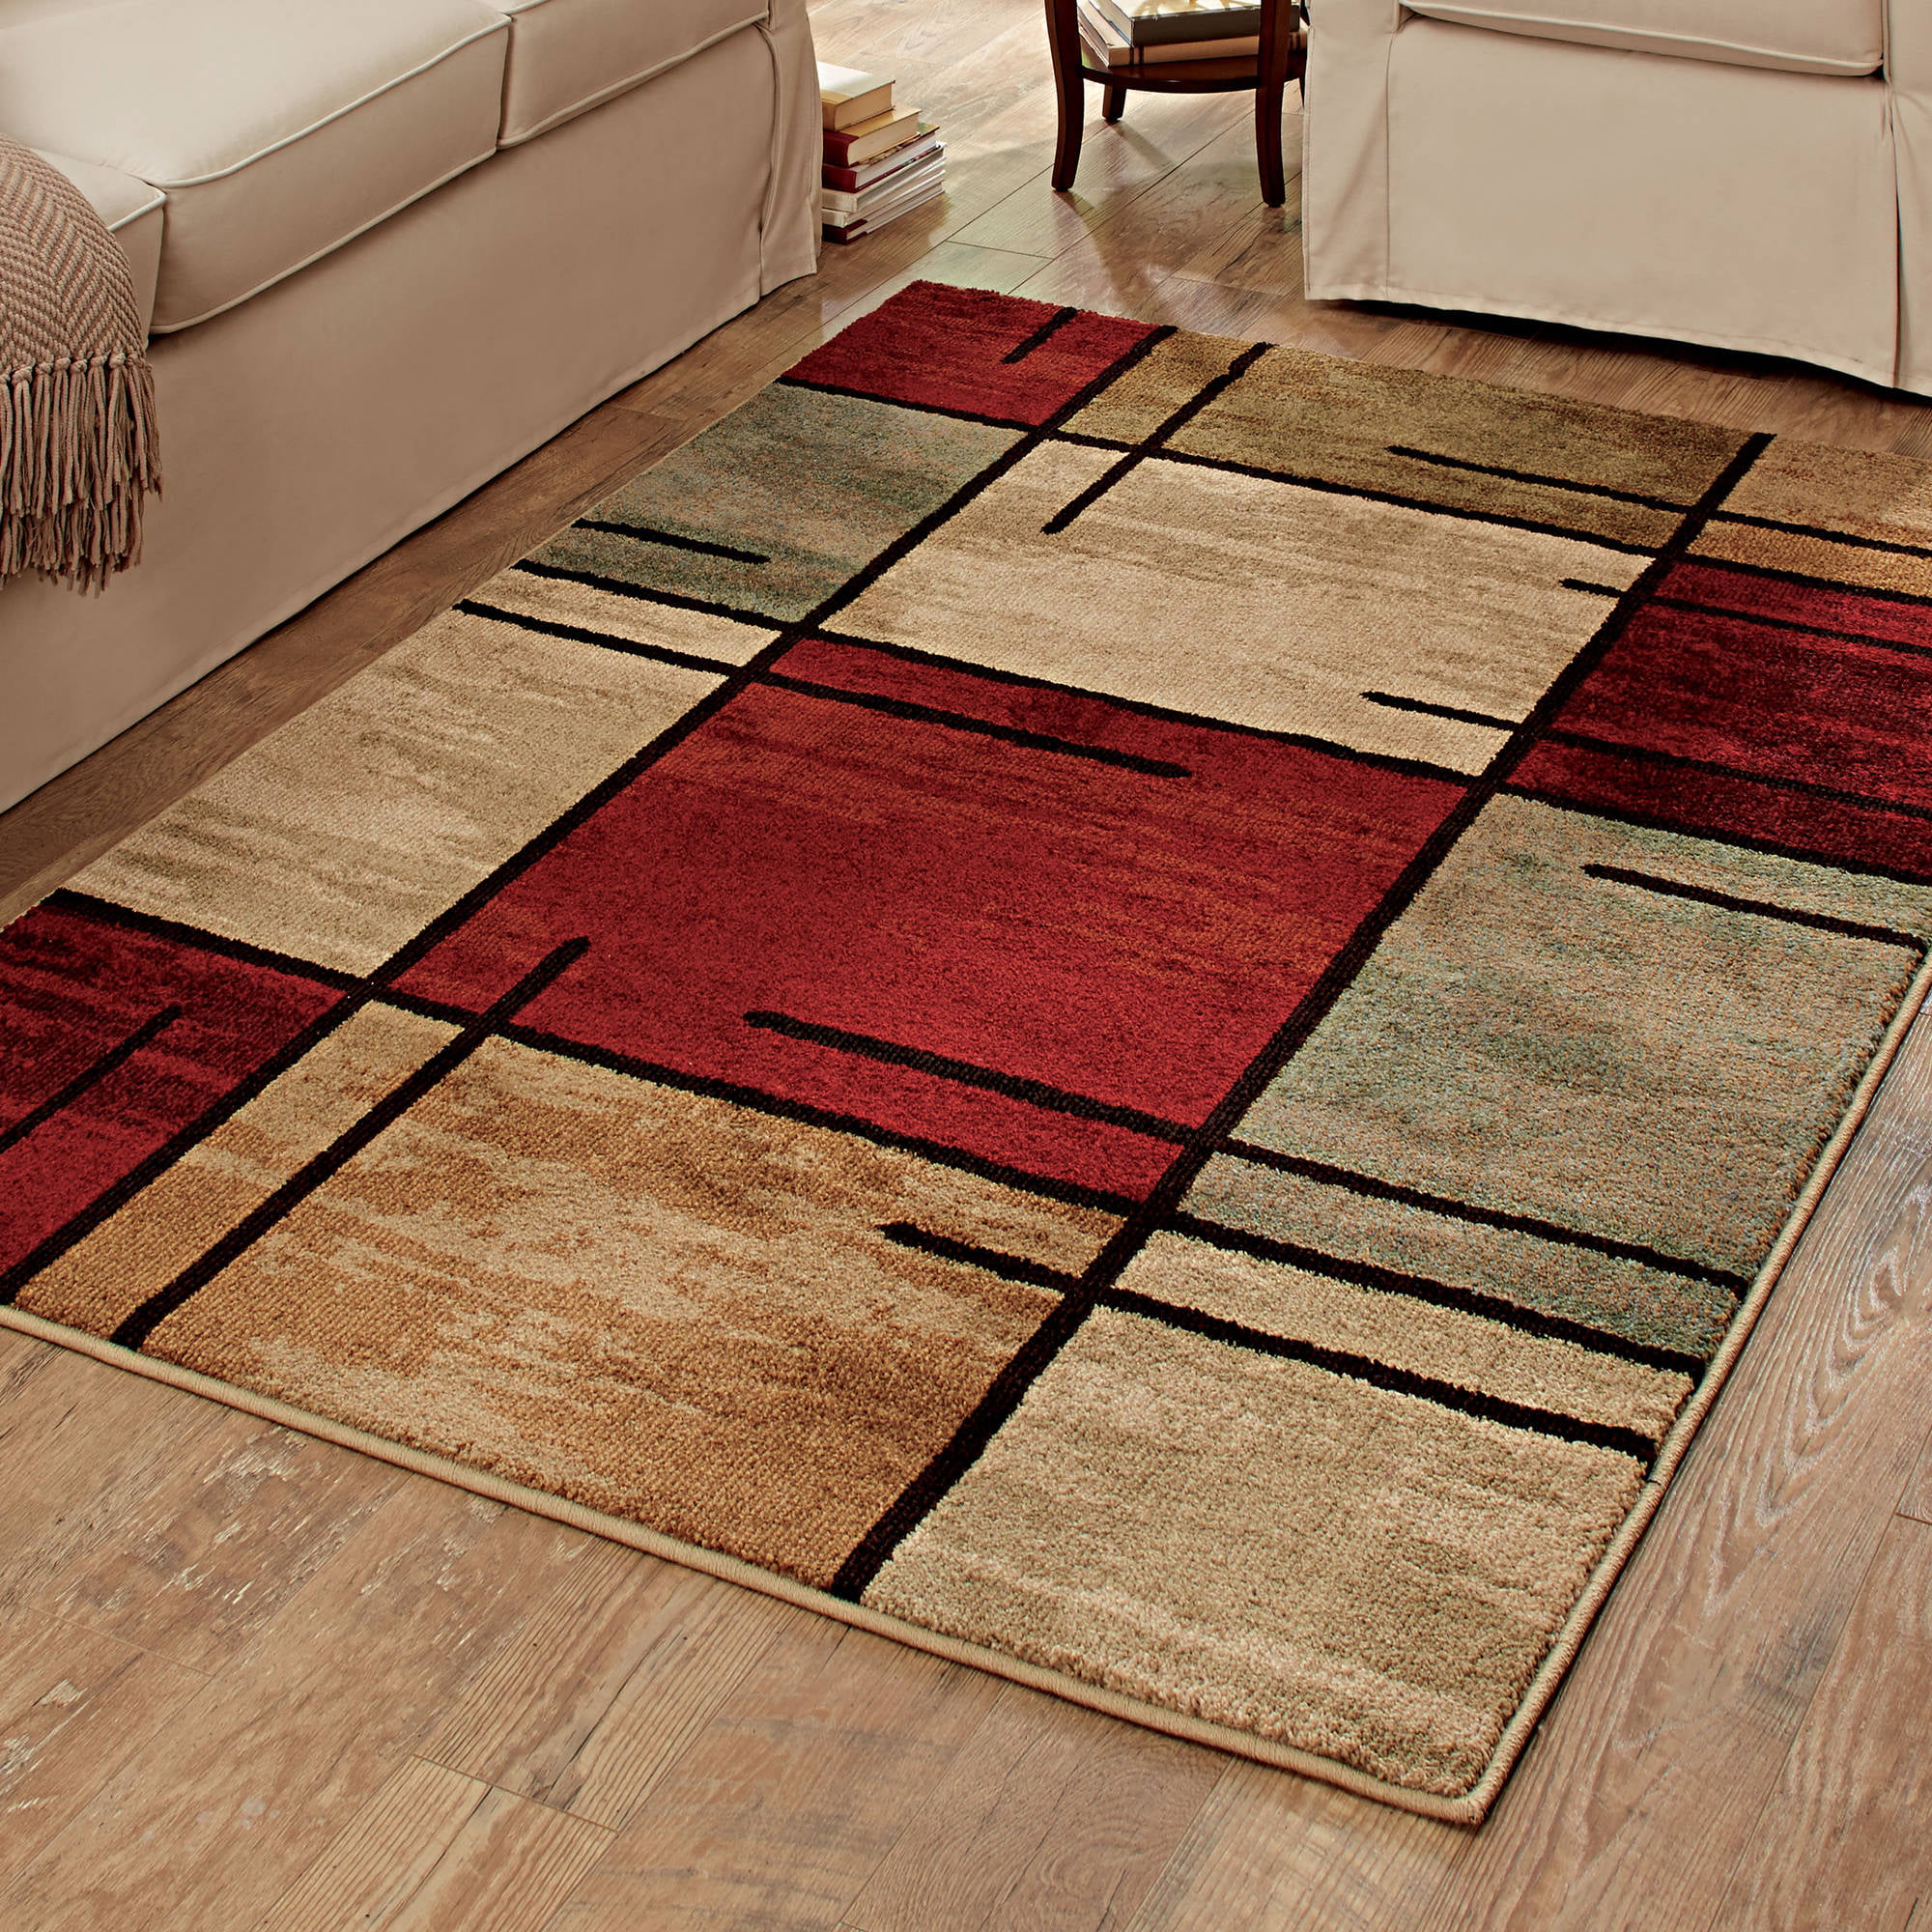 Better Homes and Gardens Spice Grid Area Rug Walmart